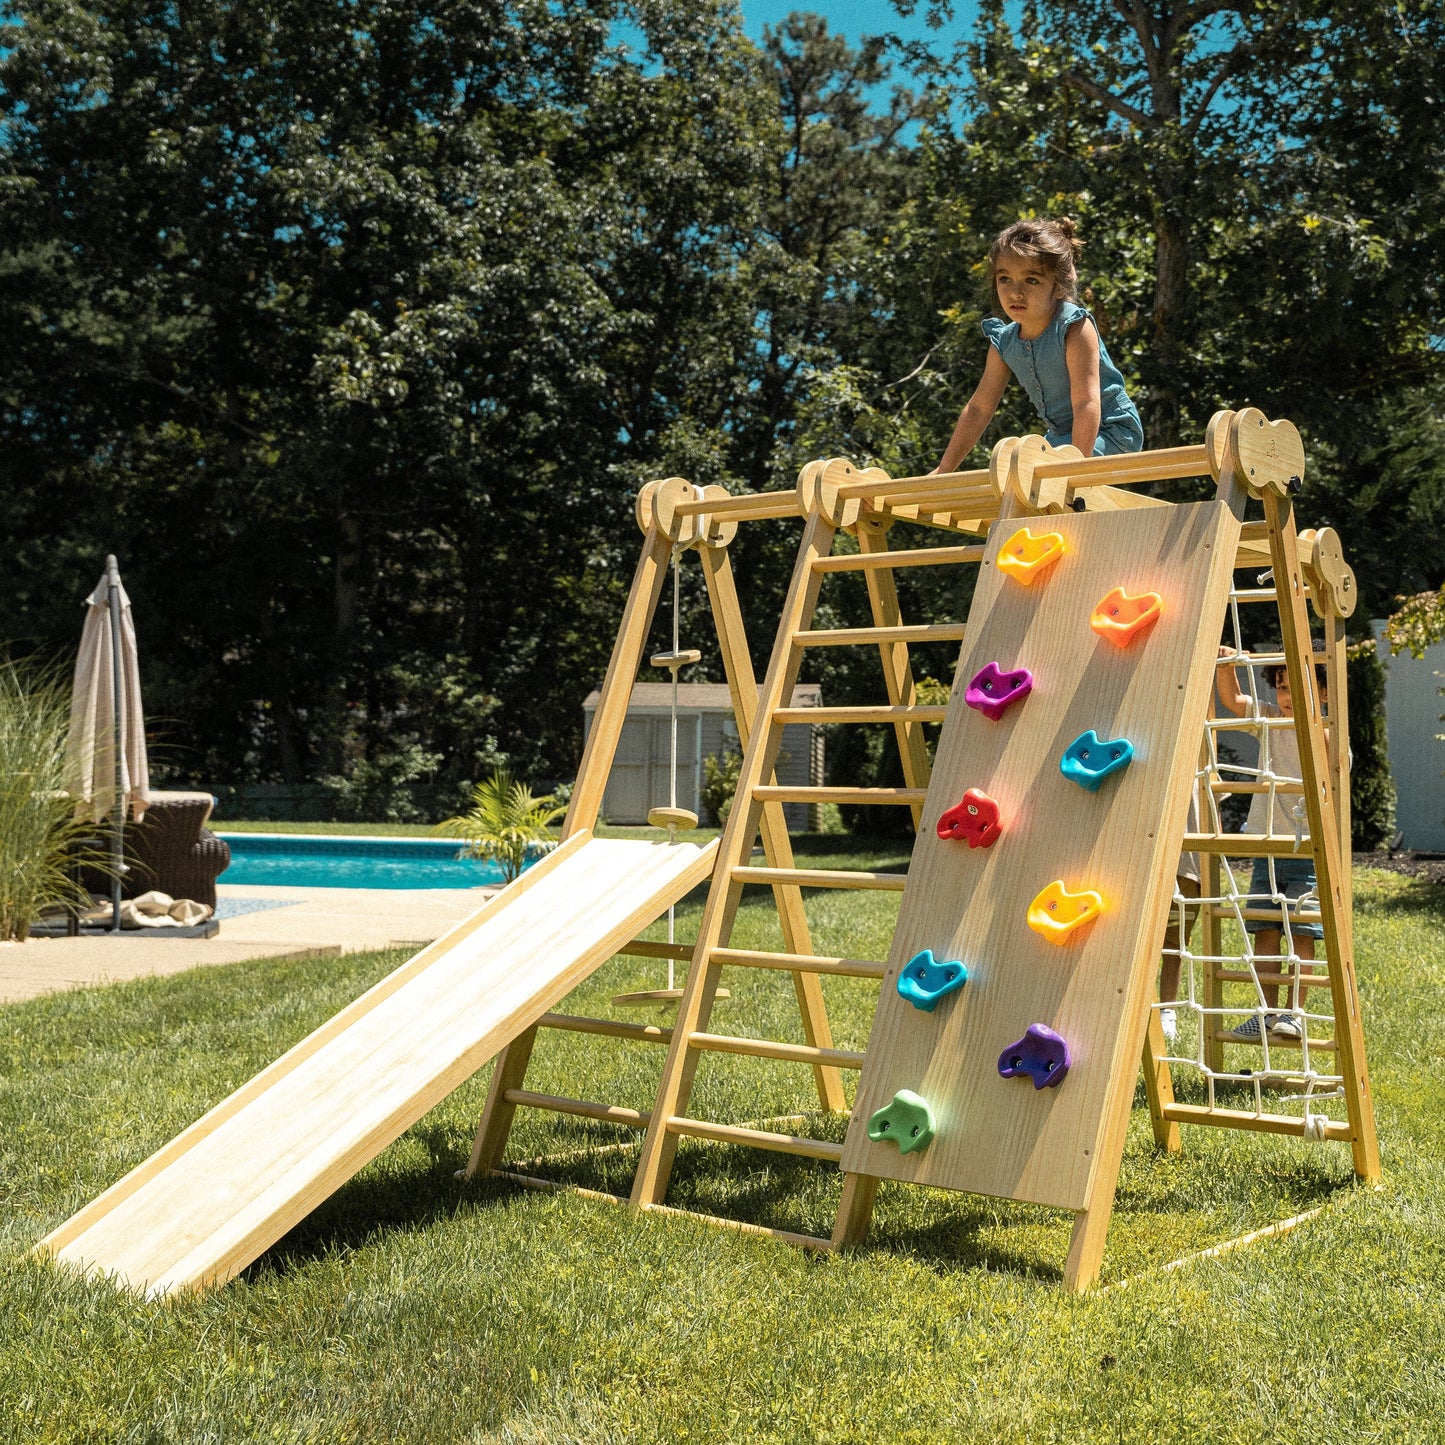 Chestnut - 8-in-1 Jungle Gym for Toddlers by Avenlur